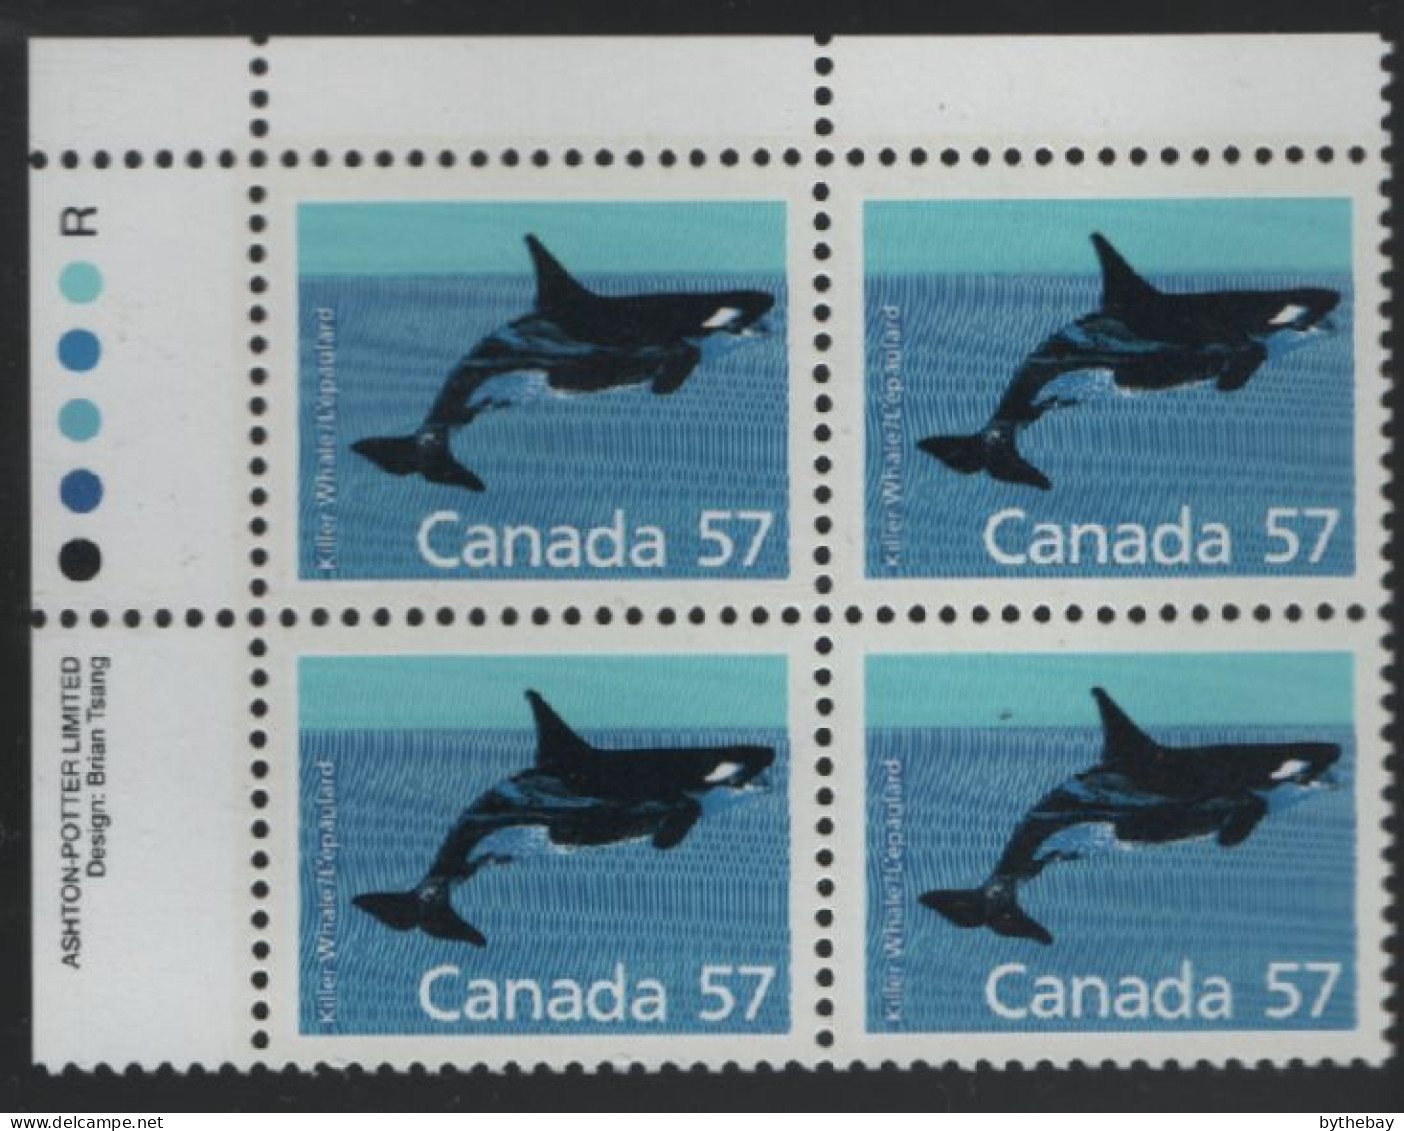 Canada 1988-92 MNH Sc 1173 57c Killer Whale UL Plate Block - Plate Number & Inscriptions